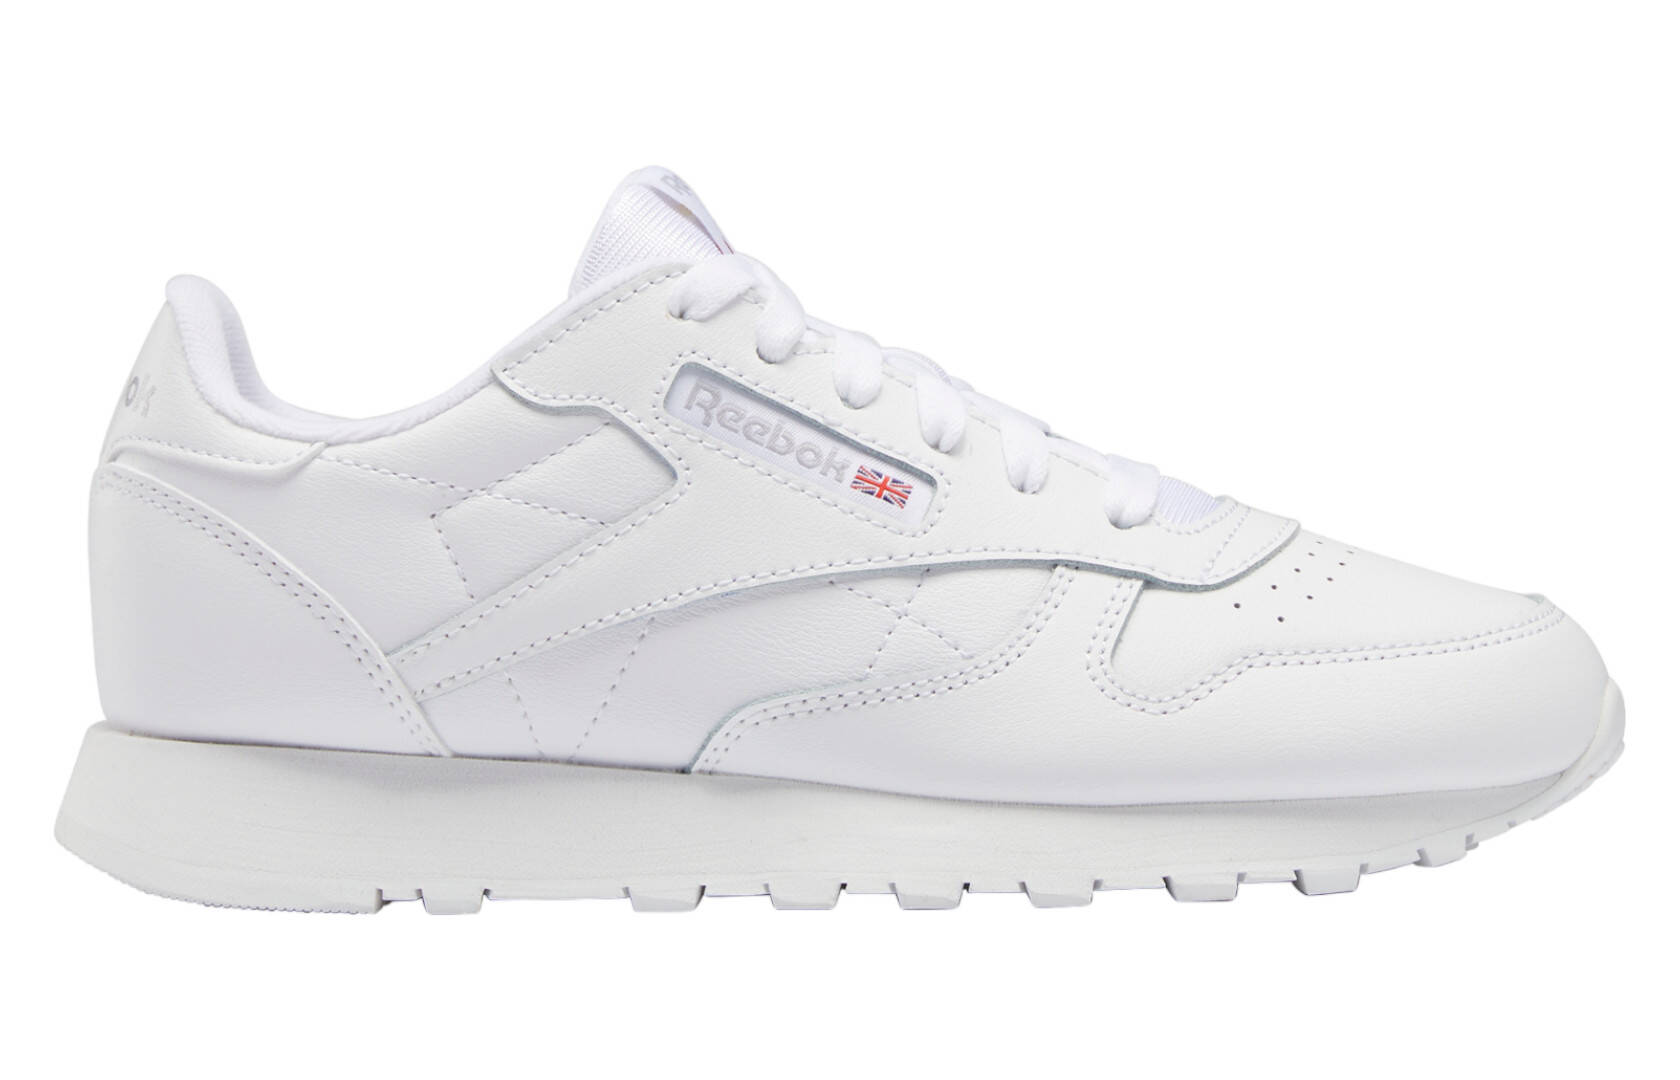 Reebok CLASSIC LEATHER youth shoes 100010471